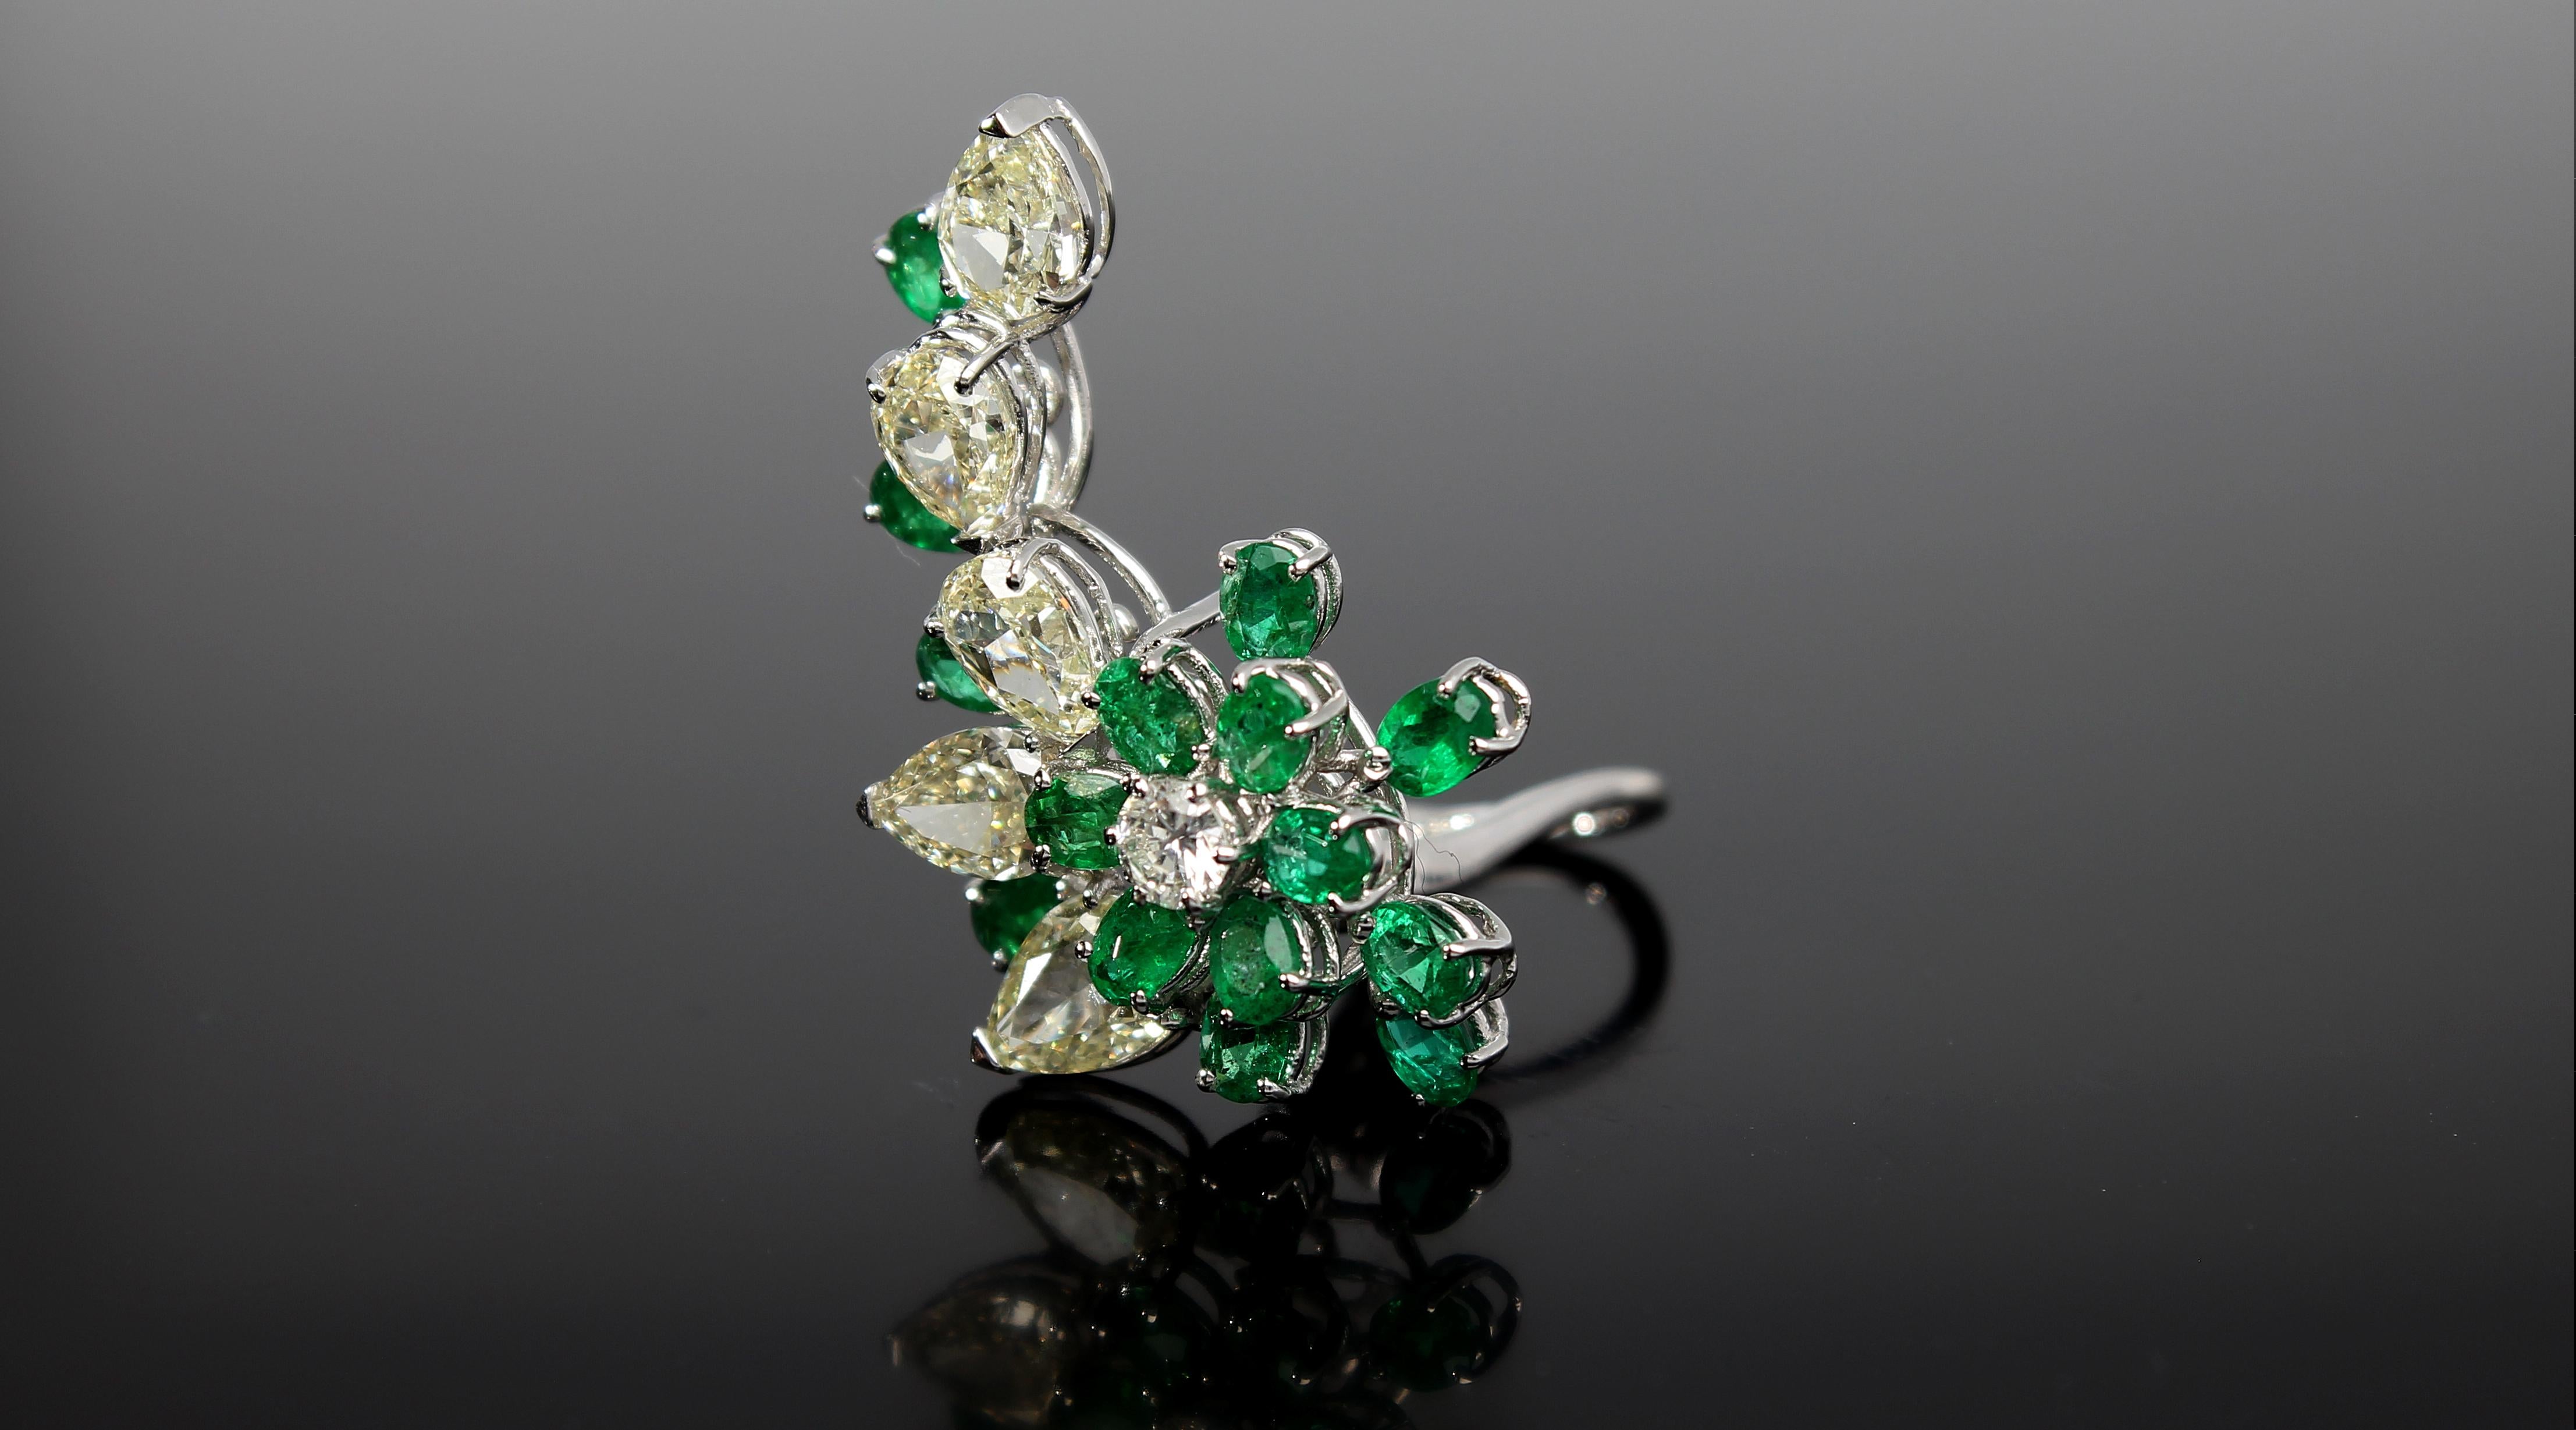 Pear Cut Cluster Earring of Diamonds and Pear-Cut Emeralds 18 Kt White Gold Made in Italy